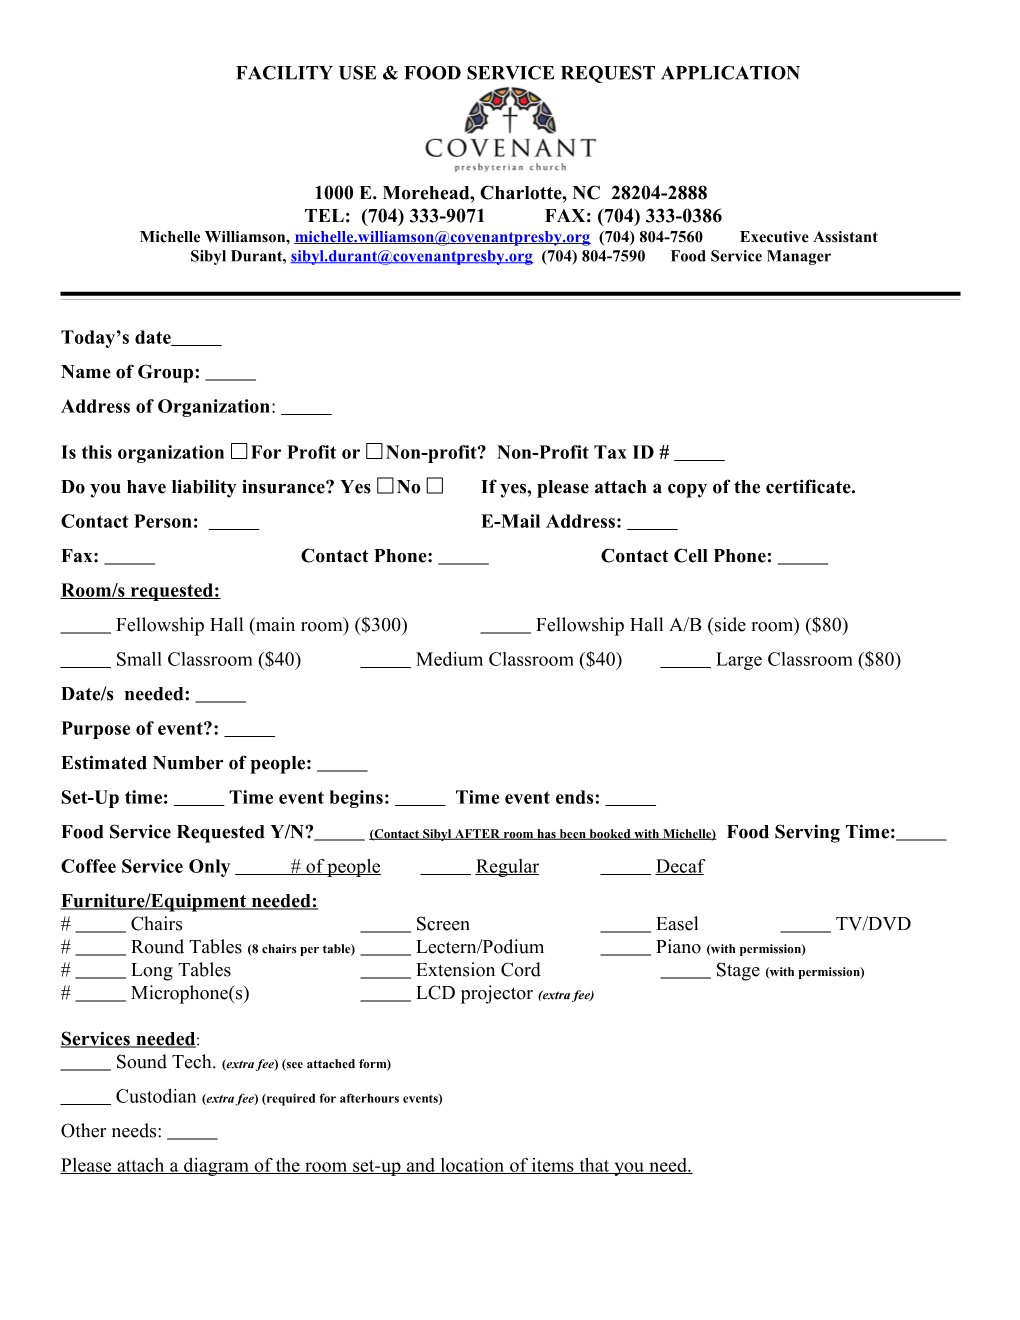 Facility Use & Food Service Request Application